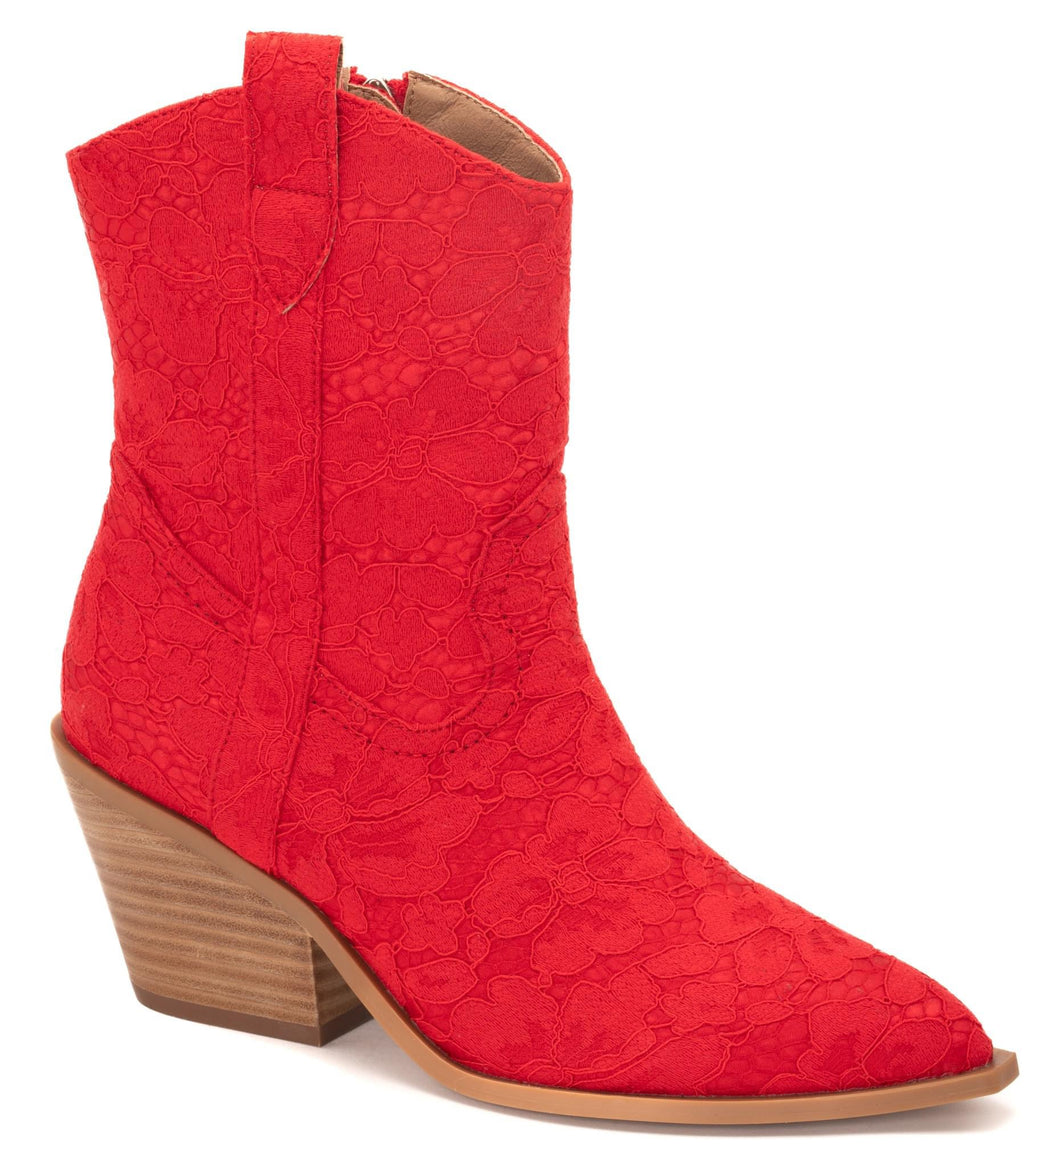 Shania Red Lace Boots